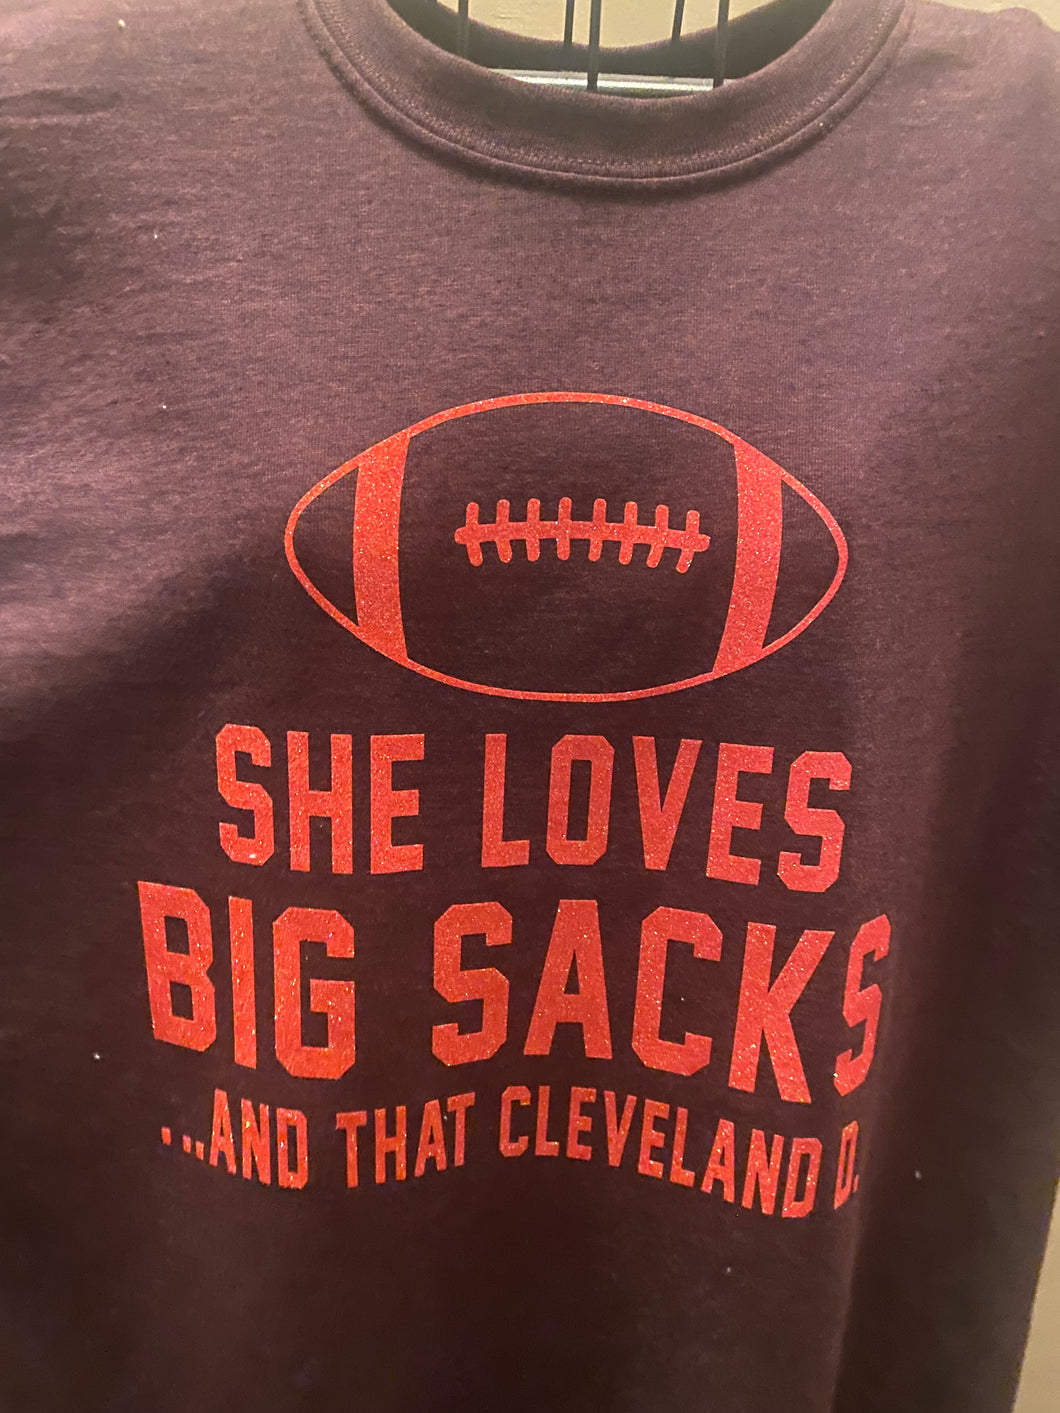 She loves that Cleveland D…